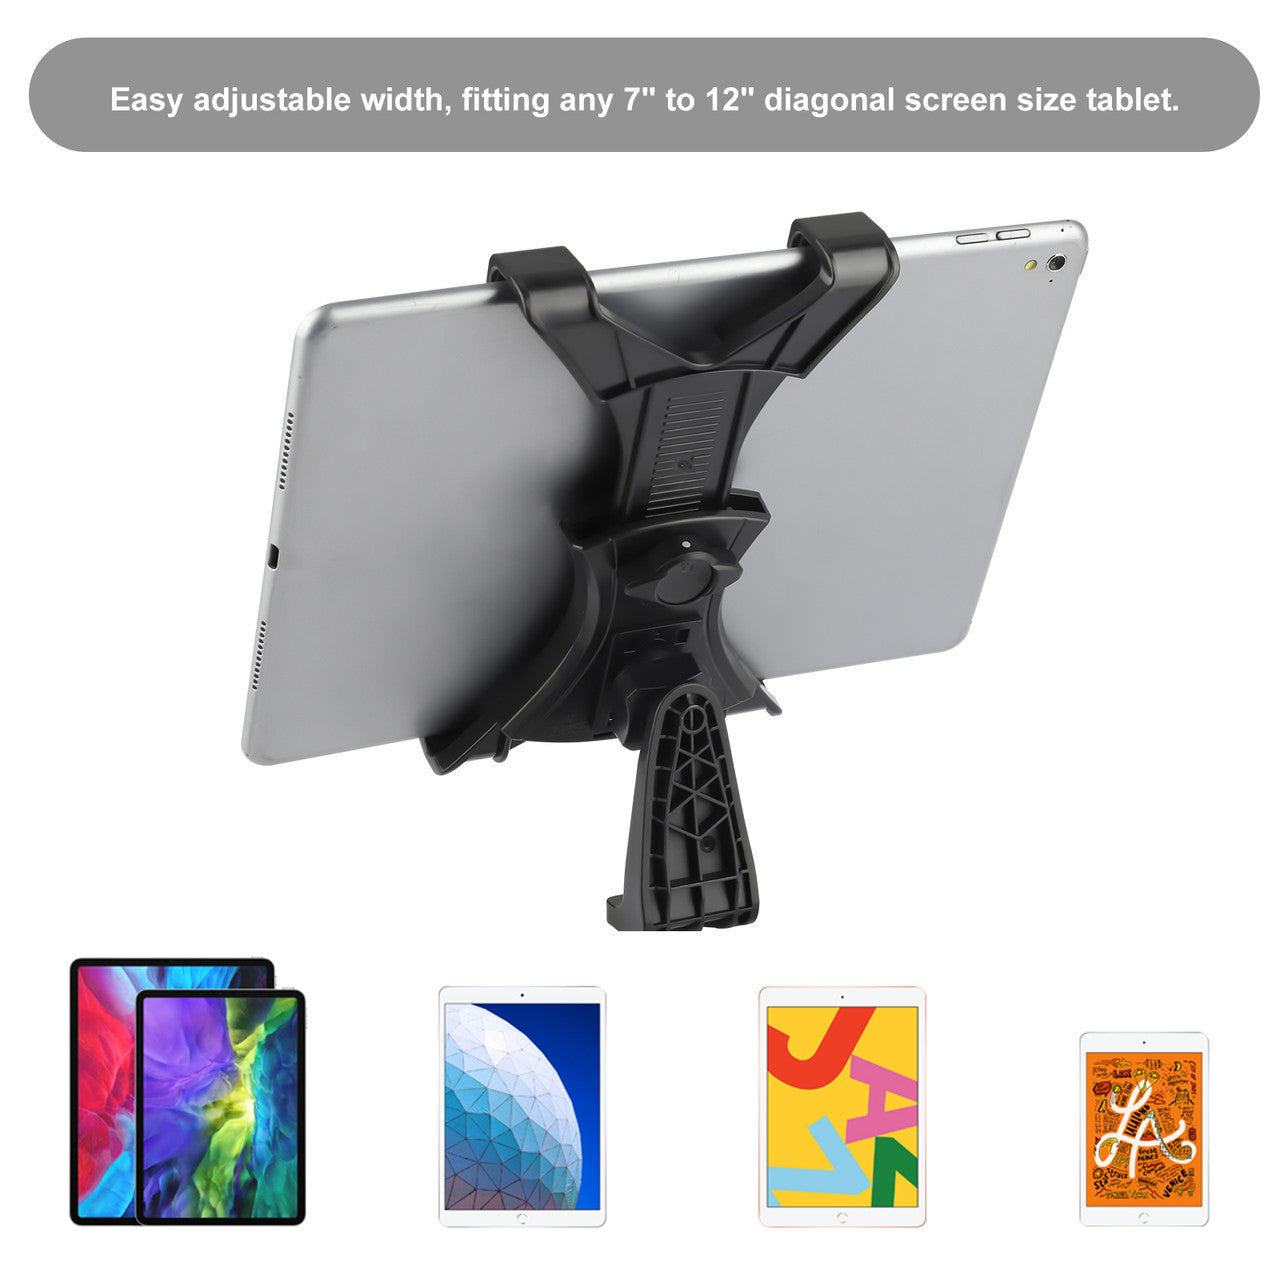 Tripod Mount for Tablet, Upgraded Universal Heavy Duty 360掳 Rotatable Tiltable Anti-Wobble Tablet Tripod Mount Adapter Holder Fit for iPad Mini Pro Air, Samsung Galaxy Tabs, 7-12" Devices